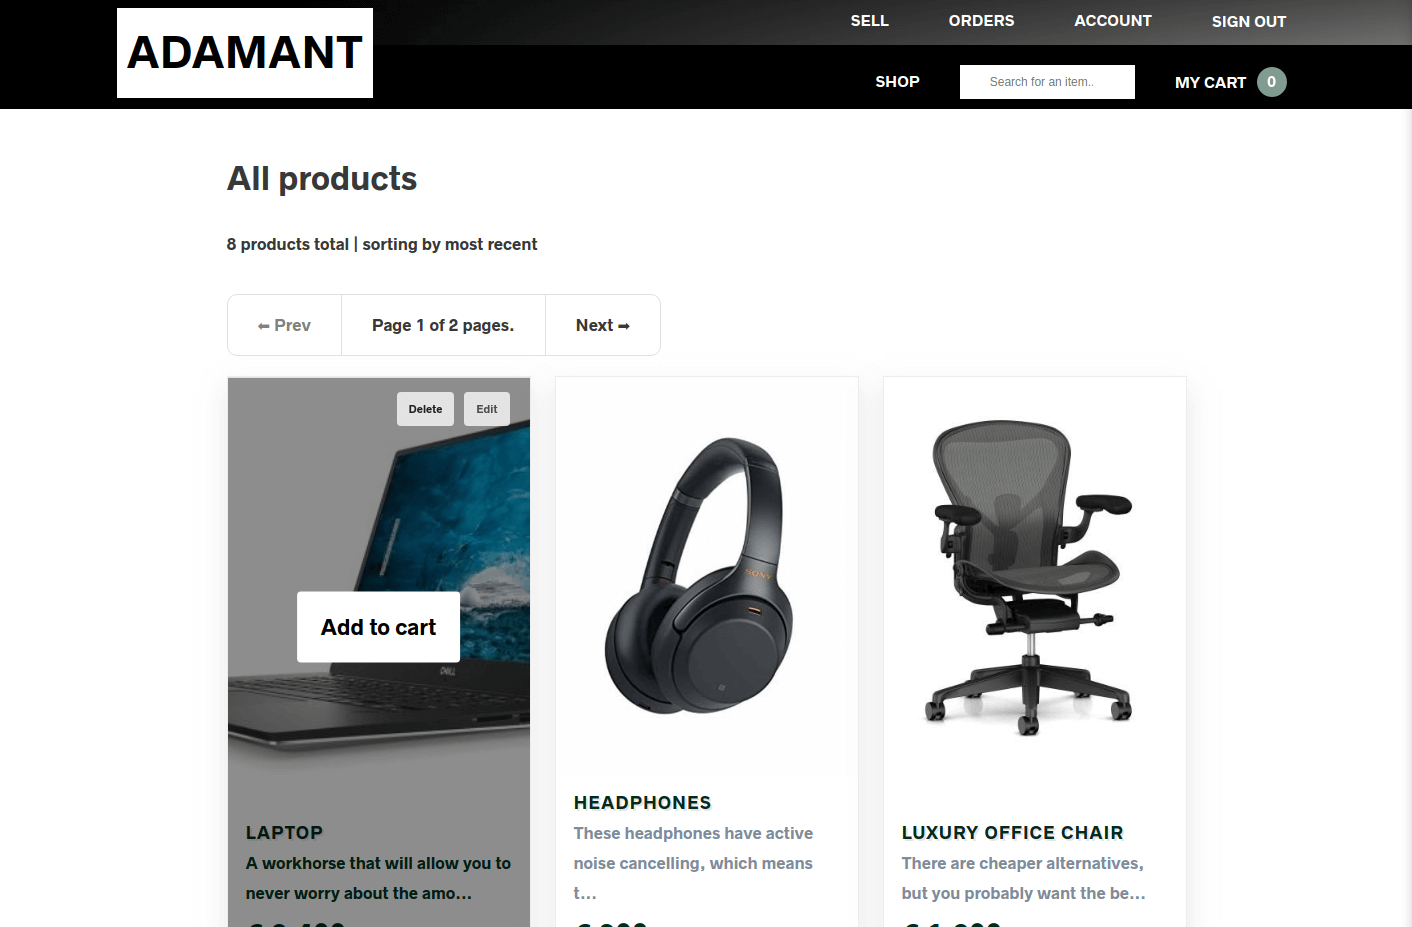 The store homepage